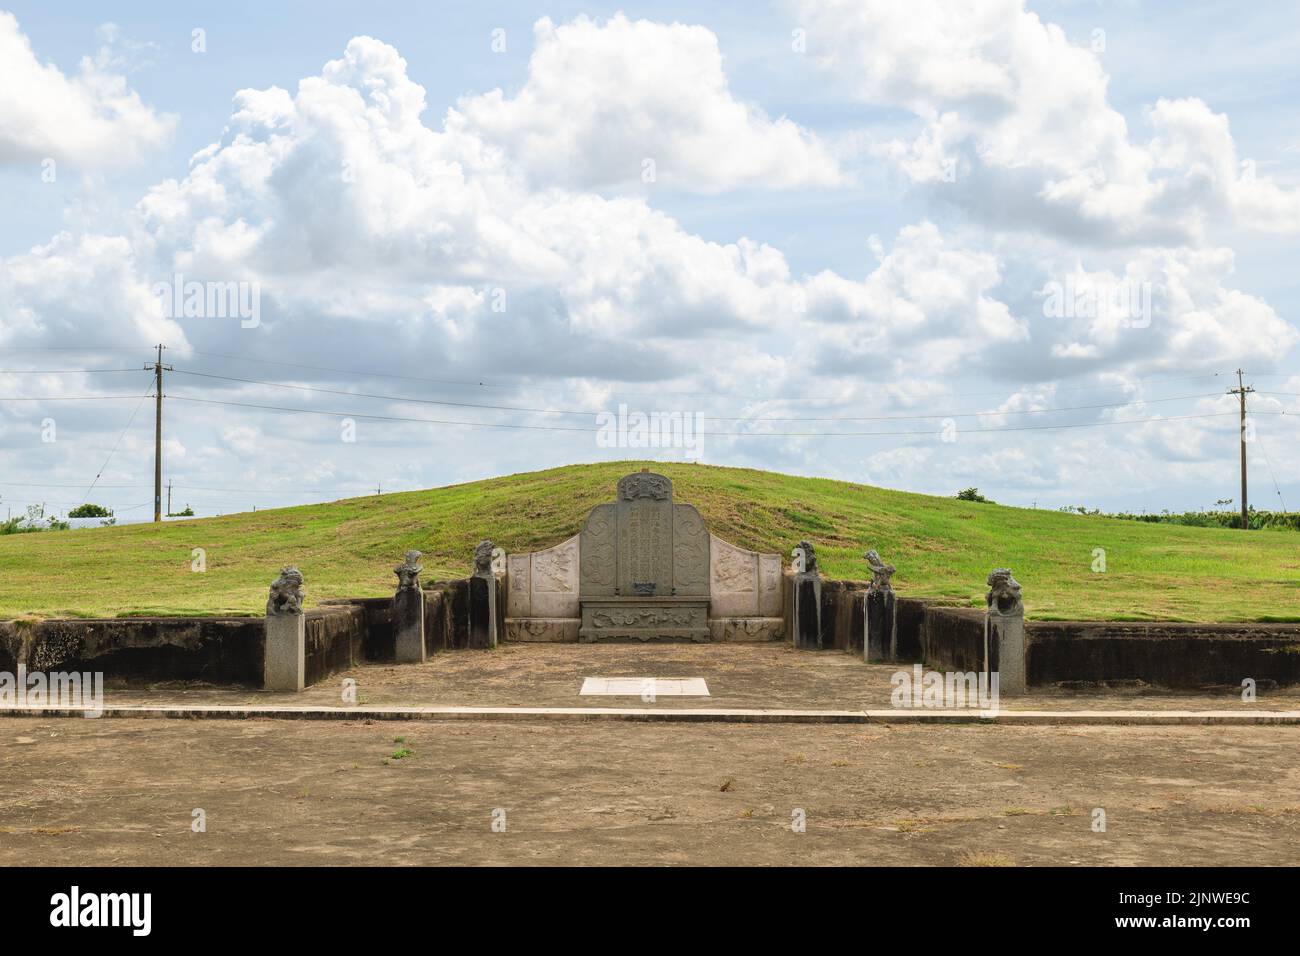 July 17, 2022: Tomb of general Wang de lu, who was a general during the Qing Dynasty. It is the largest imperial burial site in Taiwan. The tomb was b Stock Photo